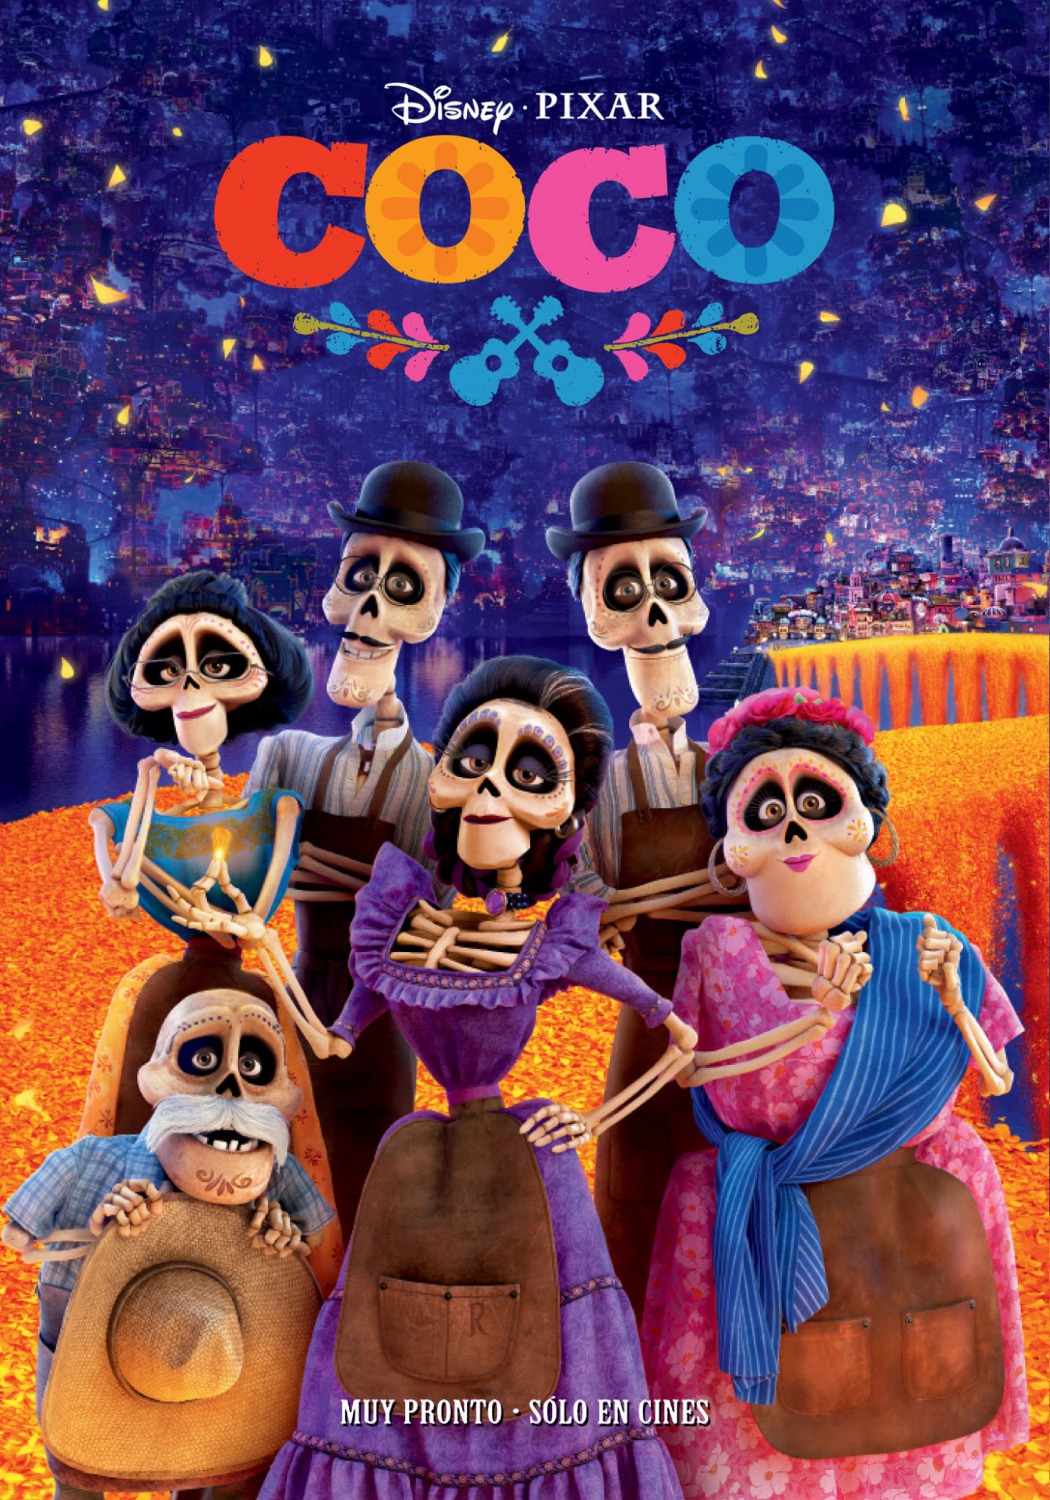 Extra Large Movie Poster Image for Coco (#12 of 17)